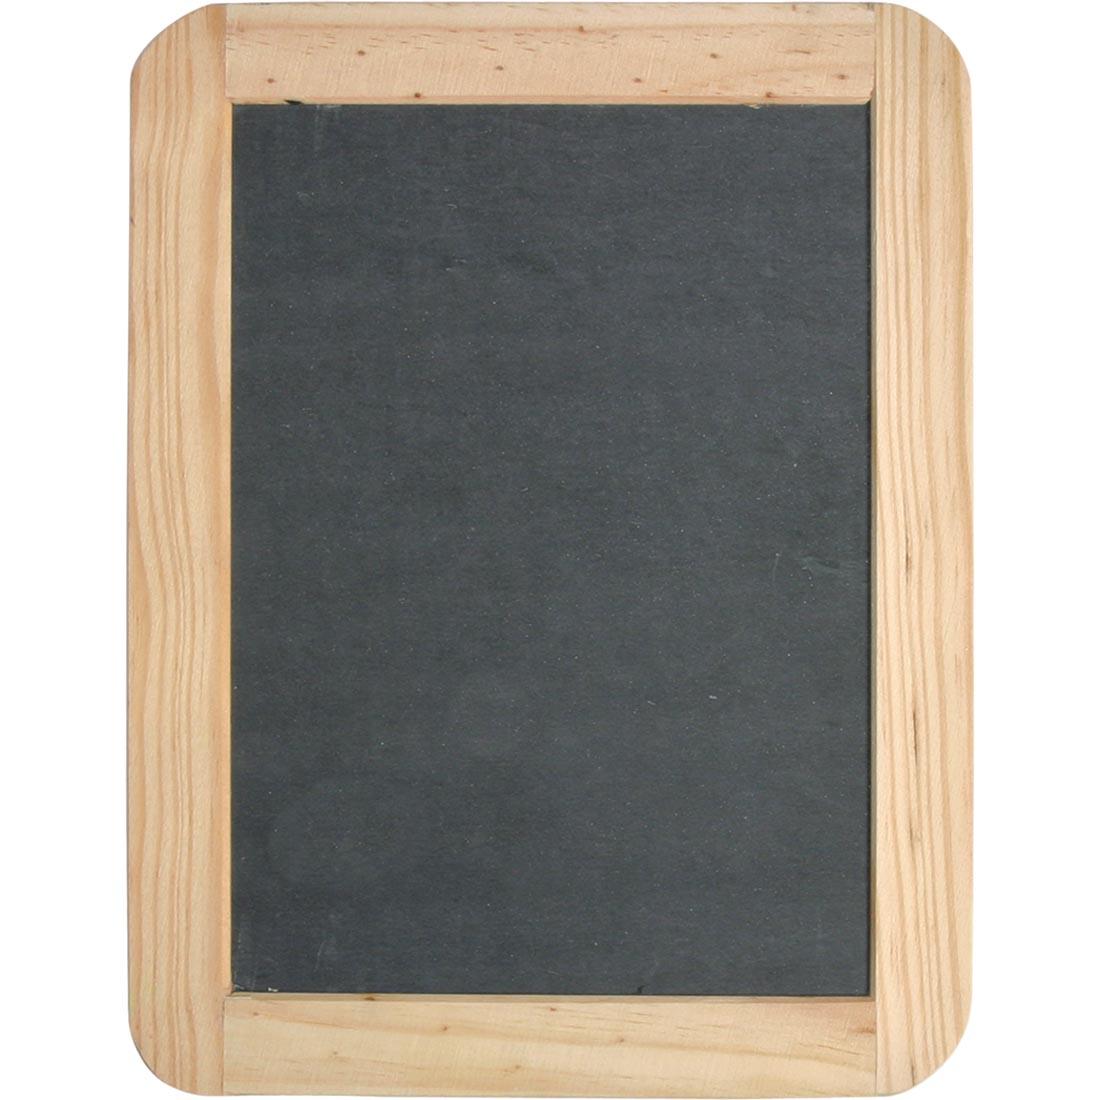 Slate Chalkboard trimmed with natural wood